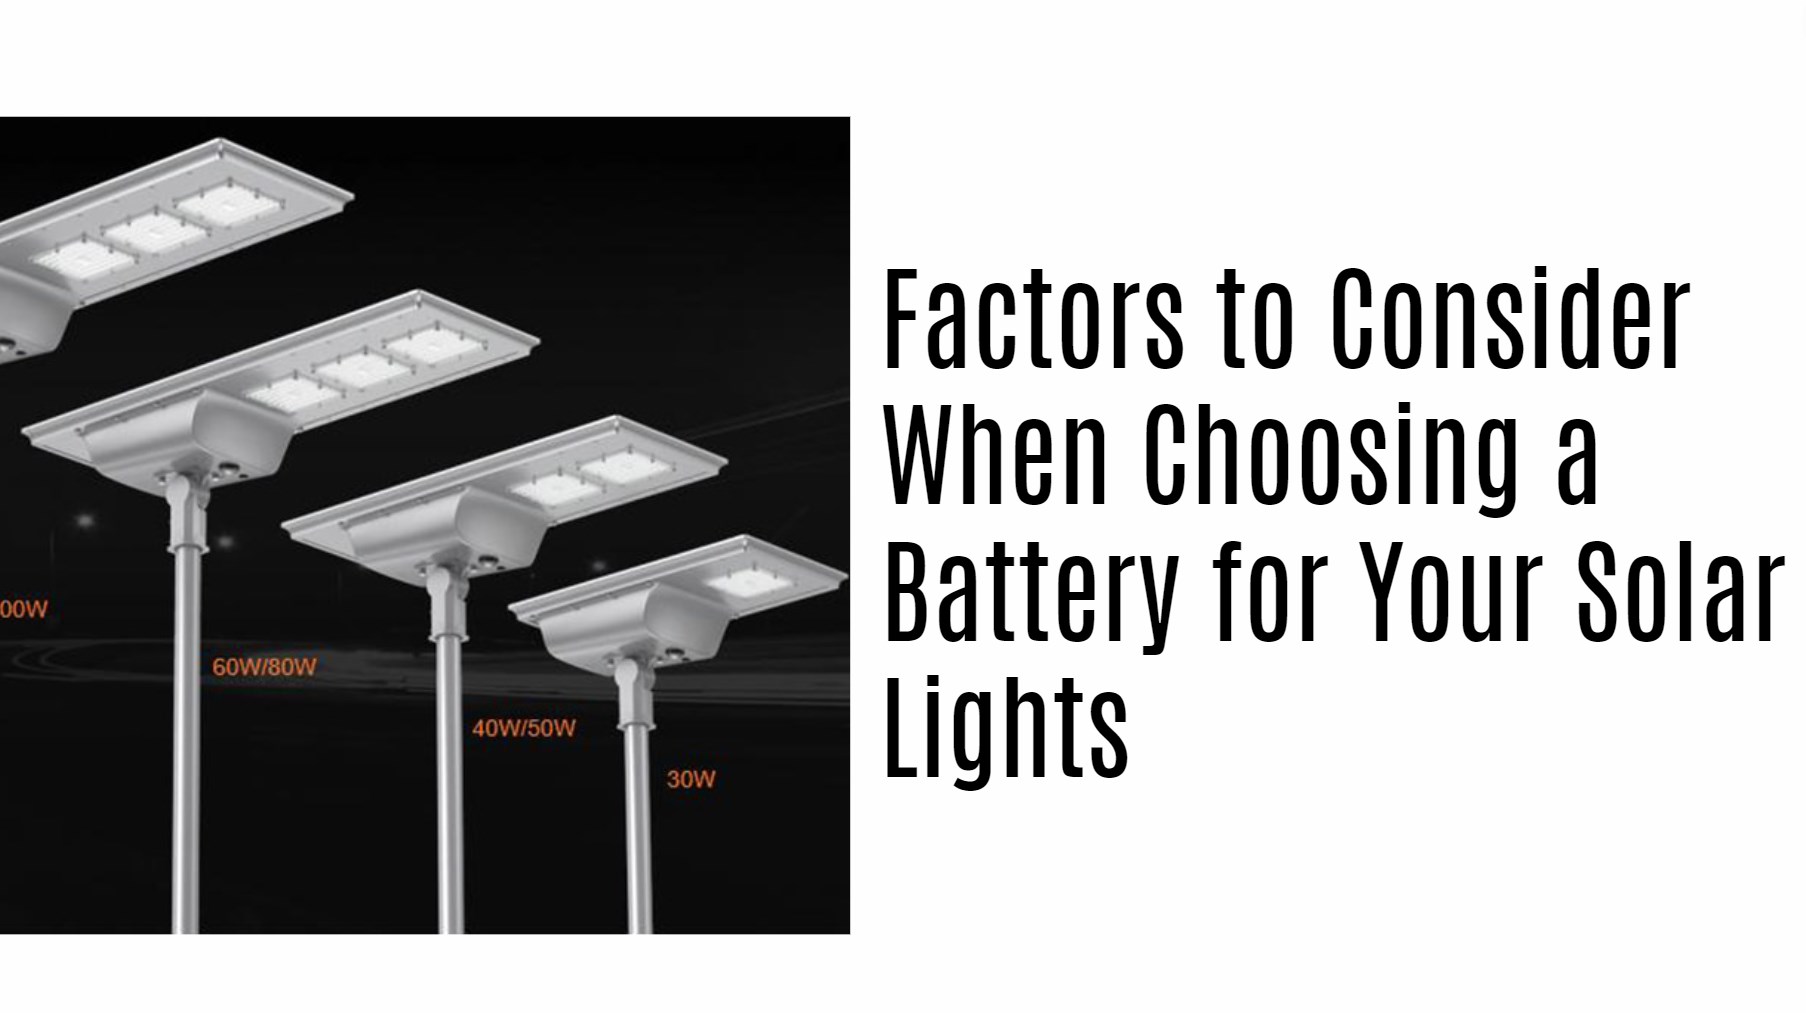 Factors to Consider When Choosing a Battery for Your Solar Lights